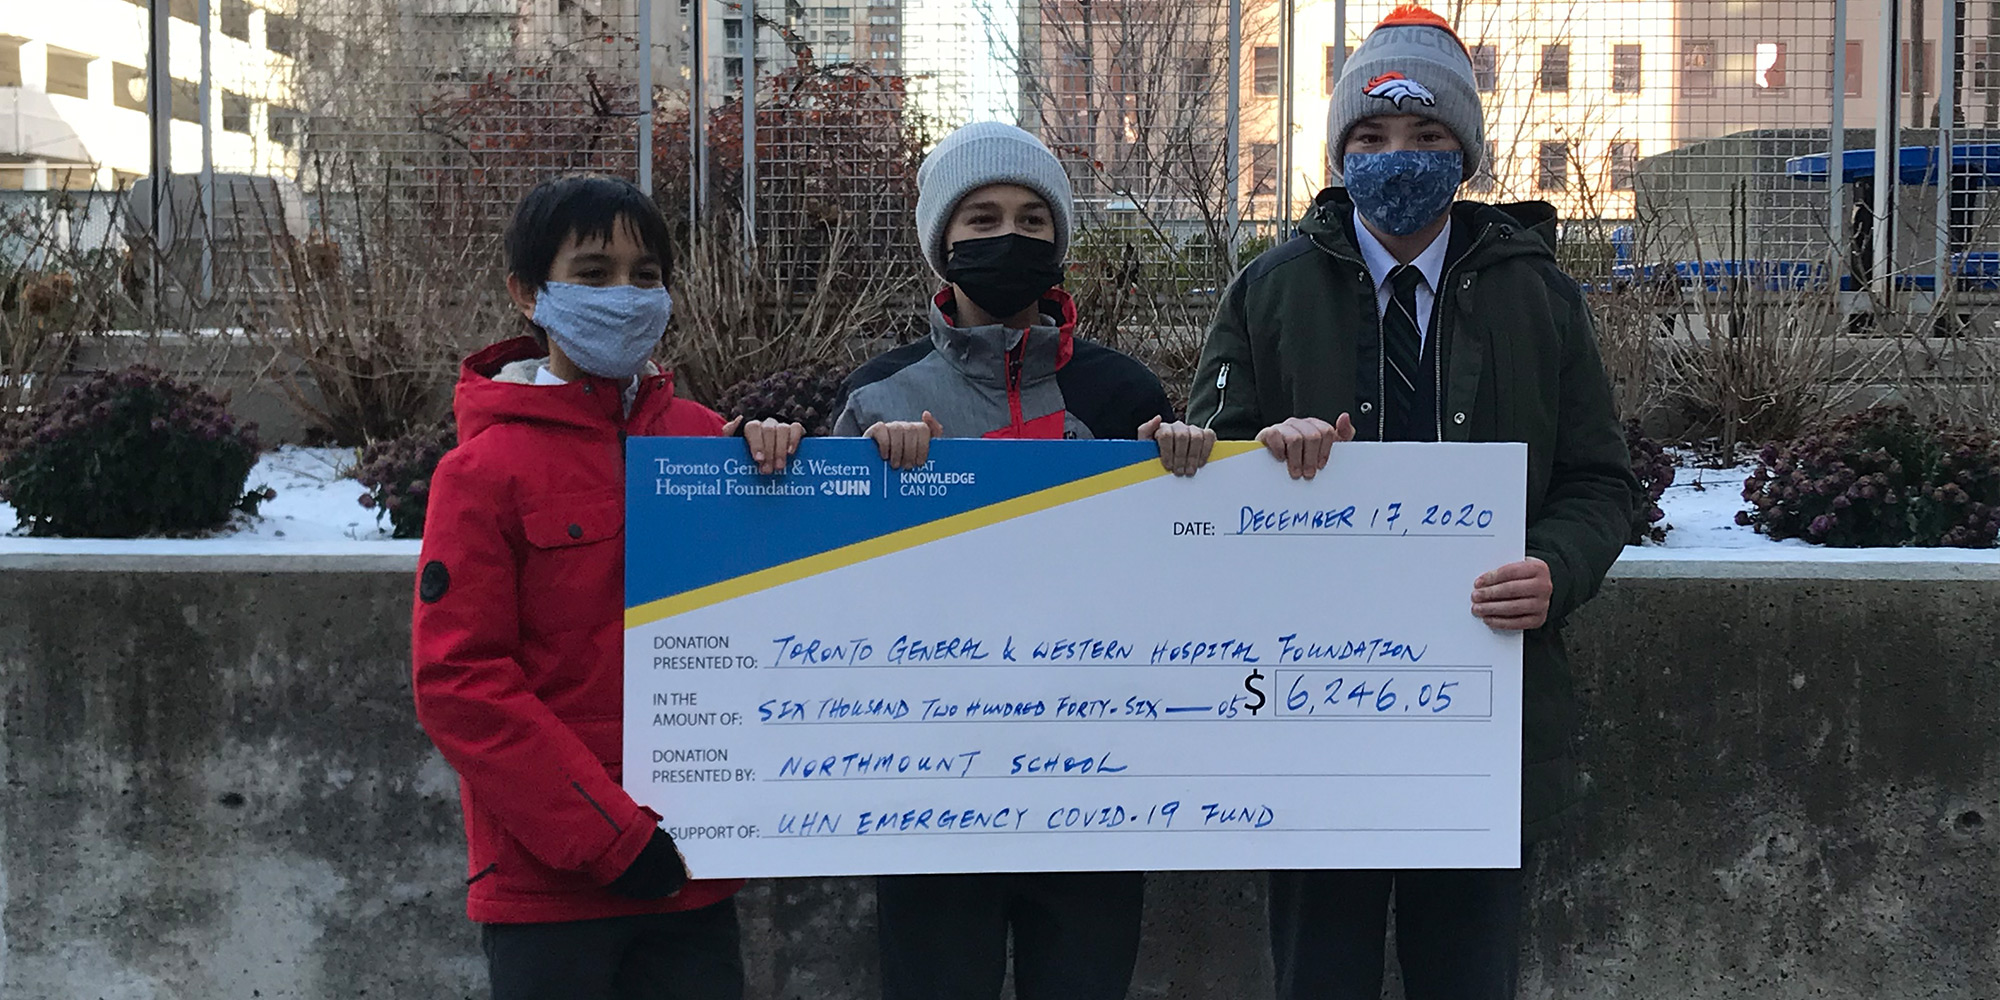 Student-run walkathon raises thousands to support UHN (image: students from Northmount present cheque)